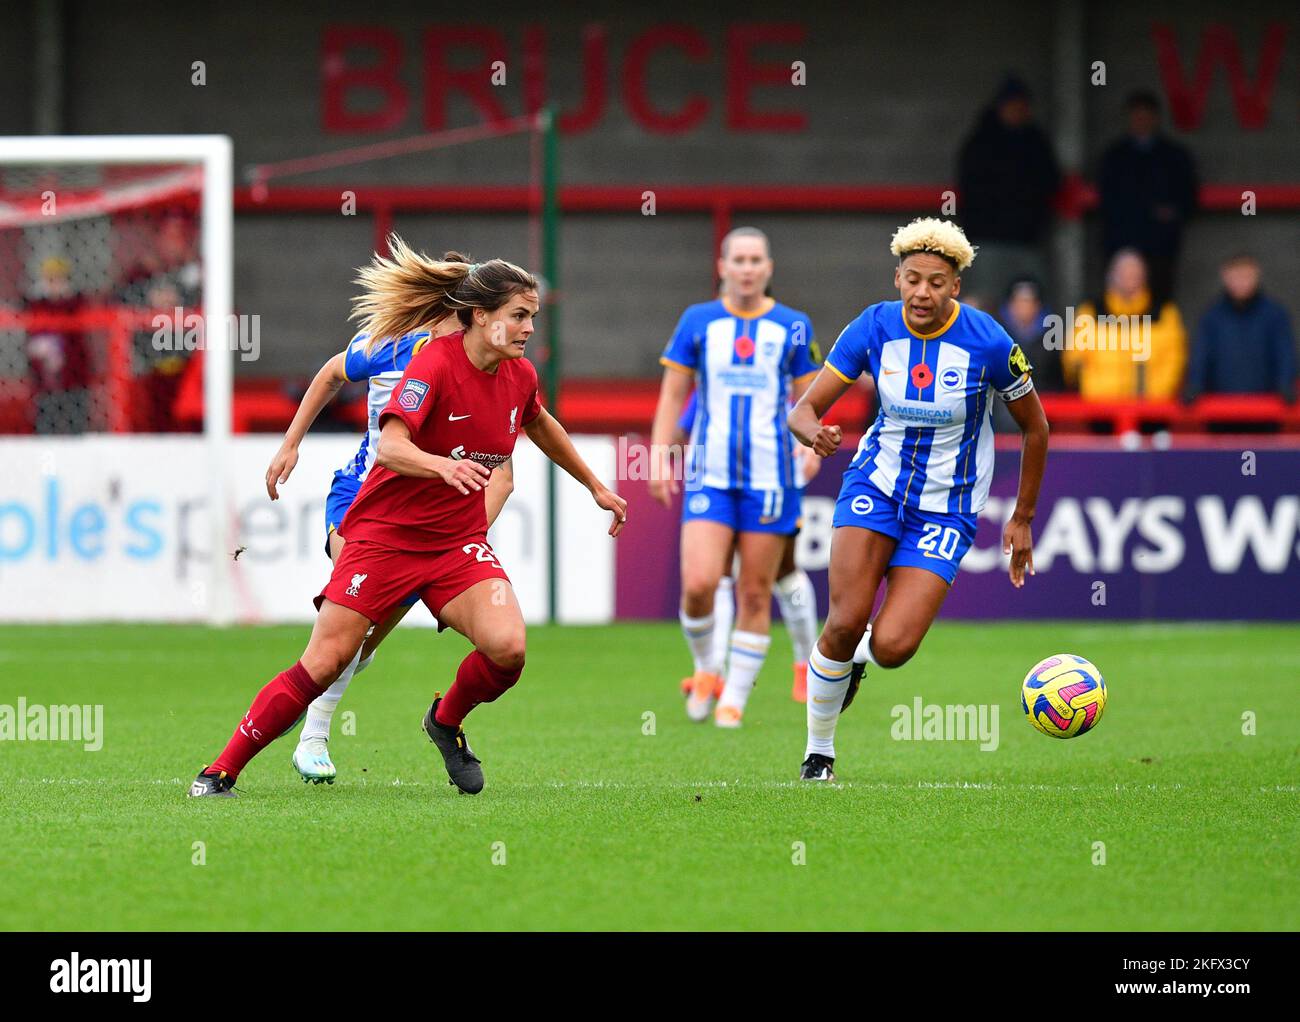 Crawley, UK. 20th Nov, 2022. Victoria Williams of Brighton and Hove Albion chases down Katie Stengel of Liverpool during the FA Women's Super League match between Brighton & Hove Albion Women and Liverpool Women at The People's Pension Stadium on November 20th 2022 in Crawley, United Kingdom. (Photo by Jeff Mood/phcimages.com) Credit: PHC Images/Alamy Live News Stock Photo